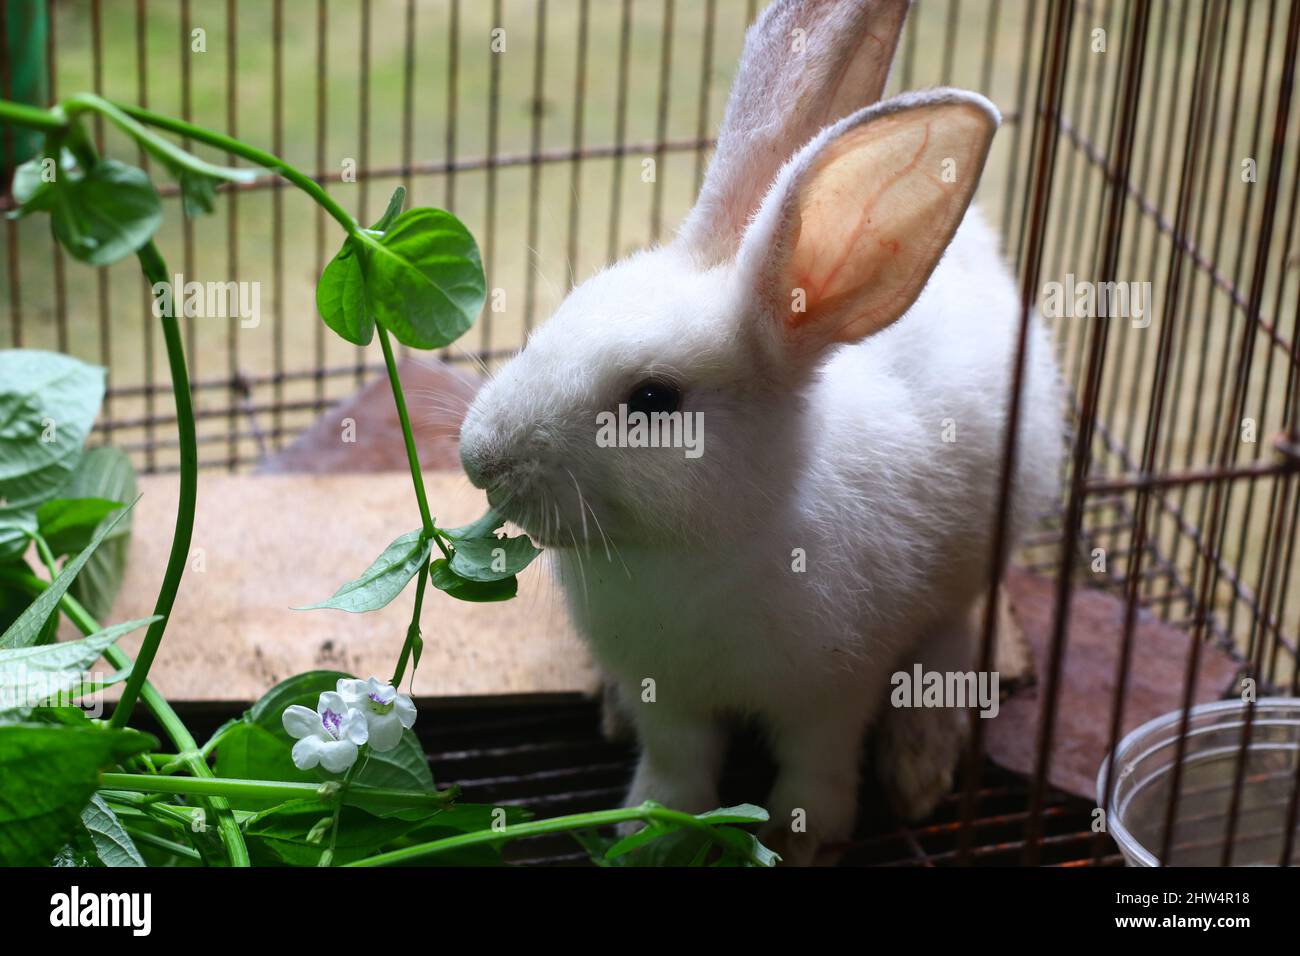 Two little cute Rabbit in a cage eating some plants or leaves. Grey and white fuzzy hair bunny. Stock Photo